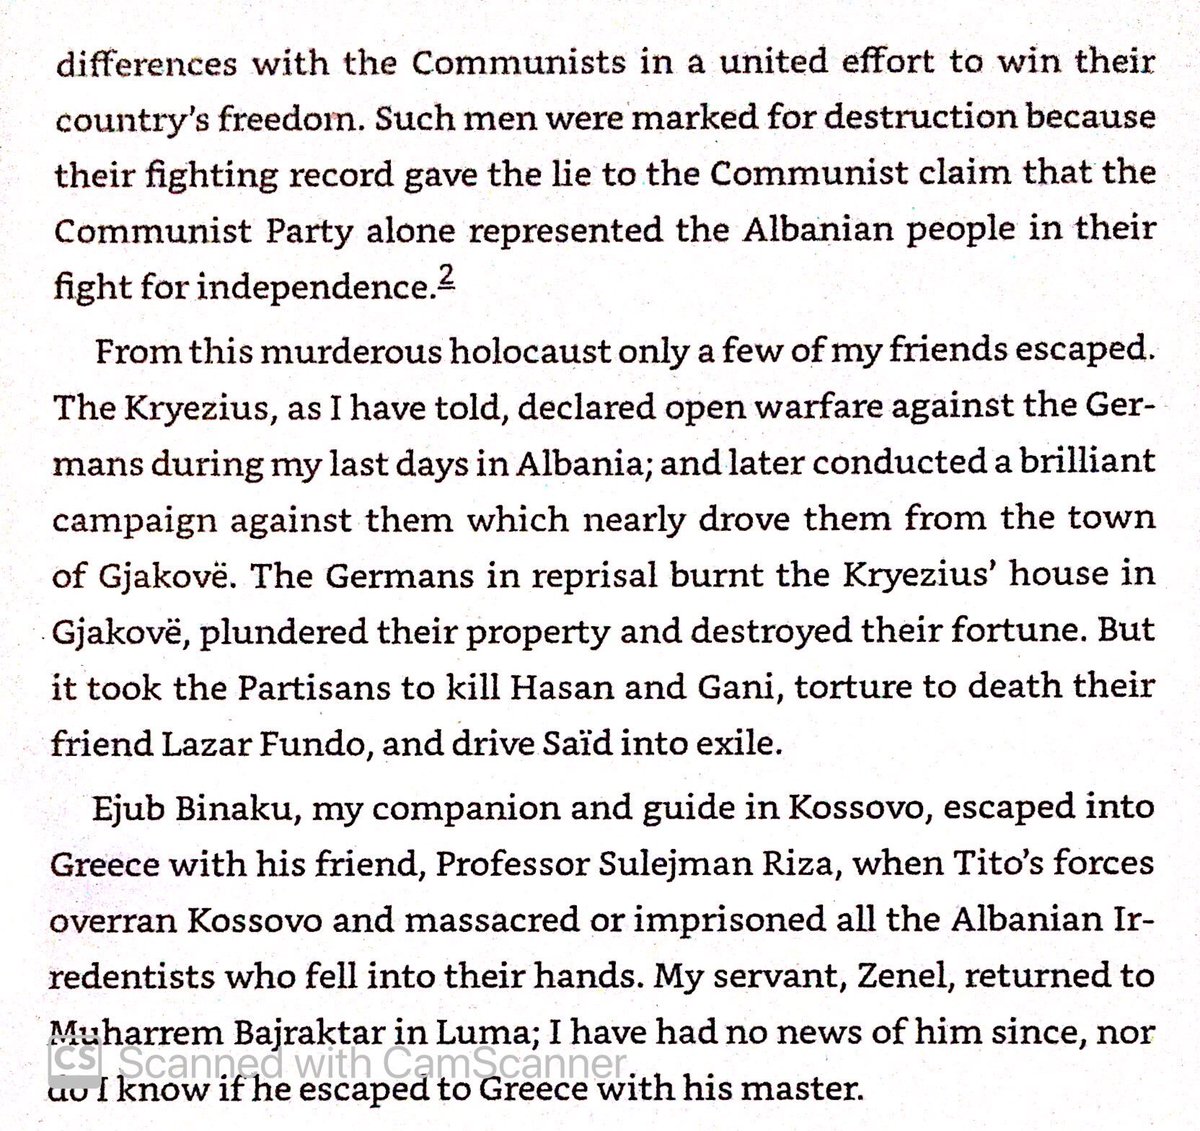 In 1944 the LNC communists overran Albania & Kosovo, killing friends of the British as well as Albanian irredentists.